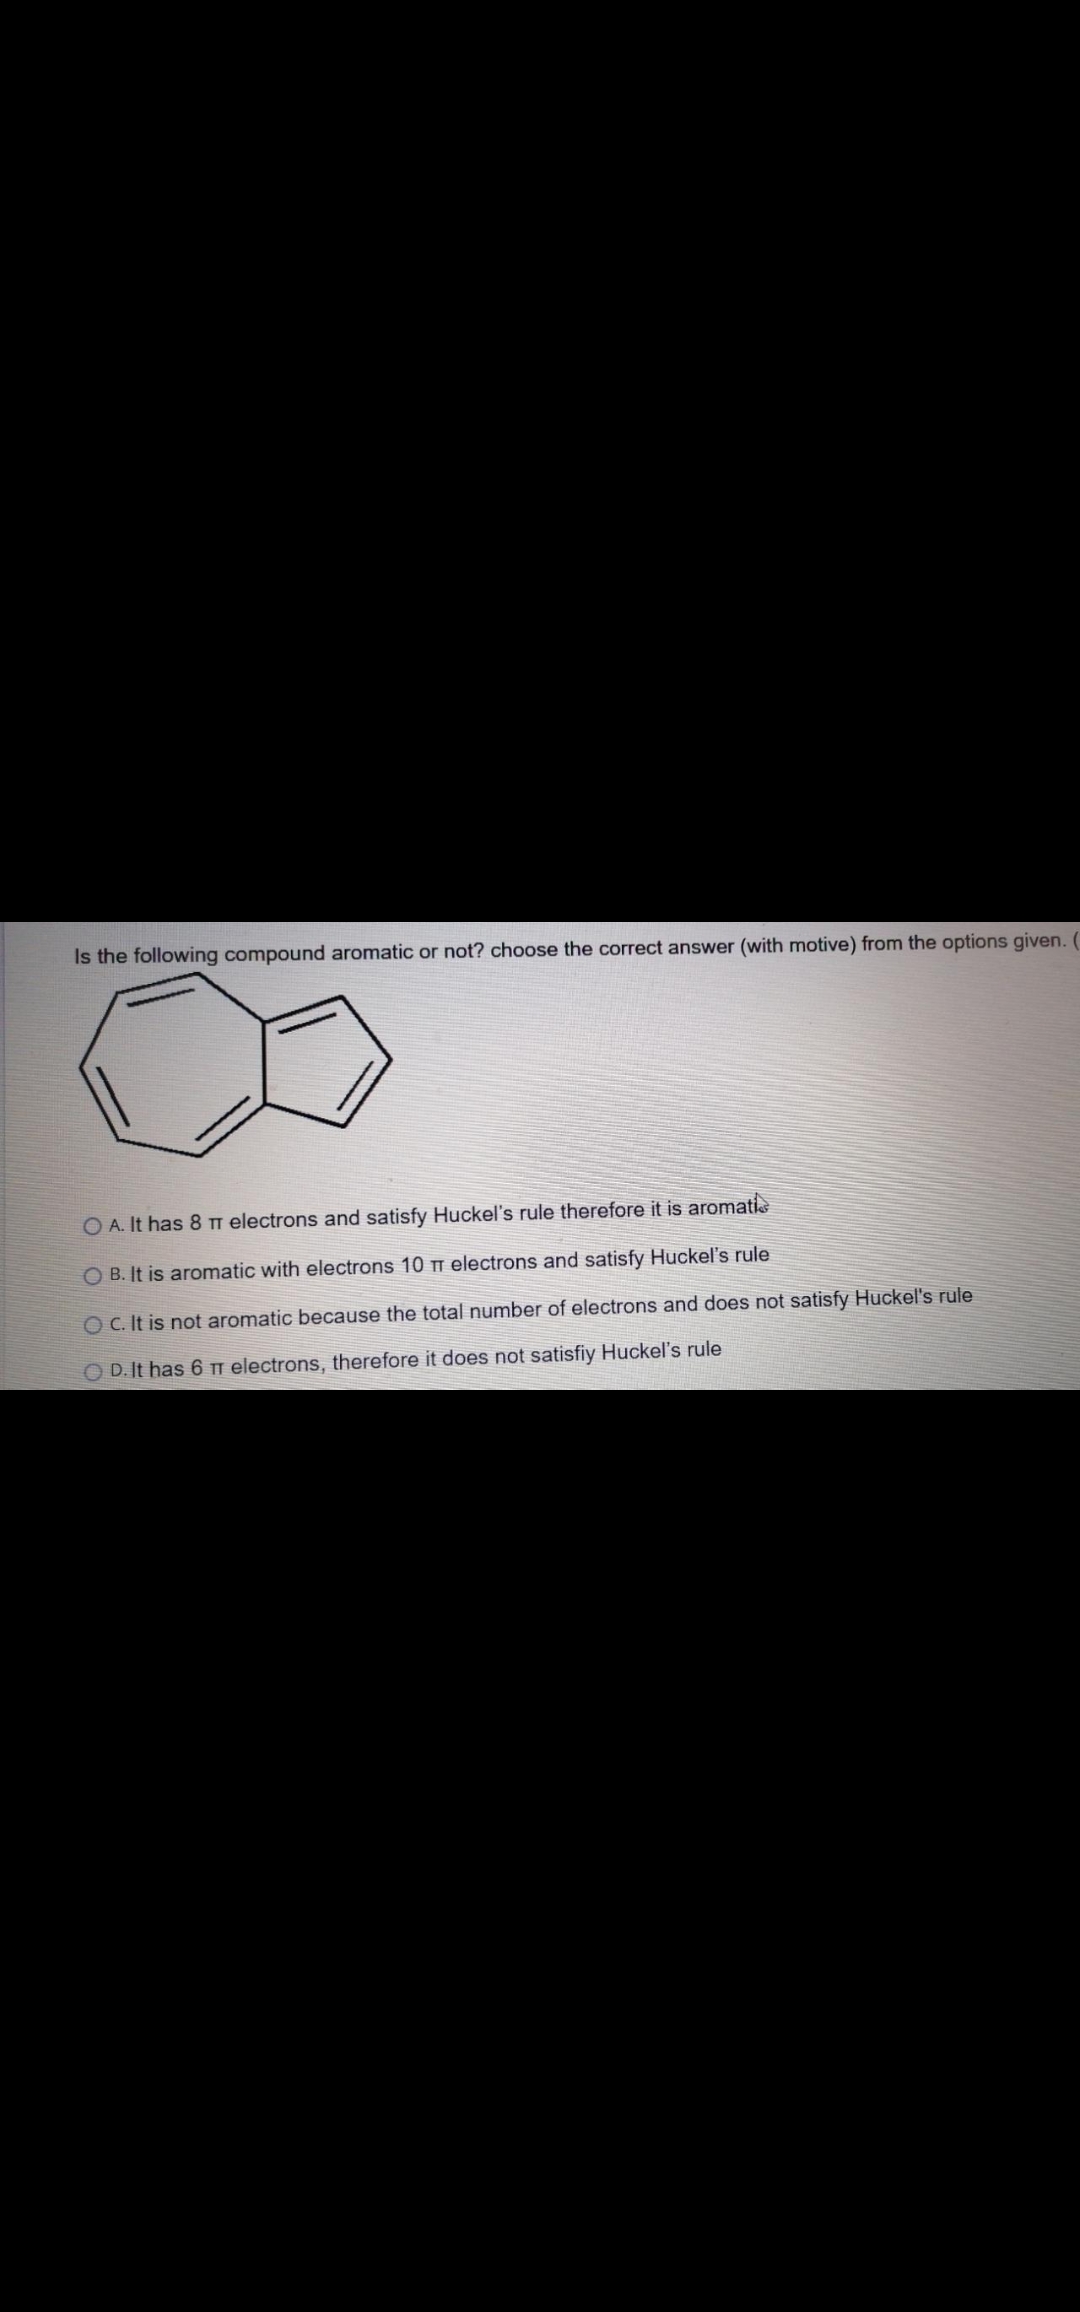 Is the following compound aromatic or not? choose the correct answer (with motive) from the options given. (
O A. It has 8 Tm electrons and satisfy Huckel's rule therefore it is aromatis
O B. It is aromatic with electrons 10 TT electrons and satisfy Huckel's rule
O C. It is not aromatic because the total number of electrons and does not satisfy Huckel's rule
O D.It has 6 Ti electrons, therefore it does not satisfiy Huckel's rule
